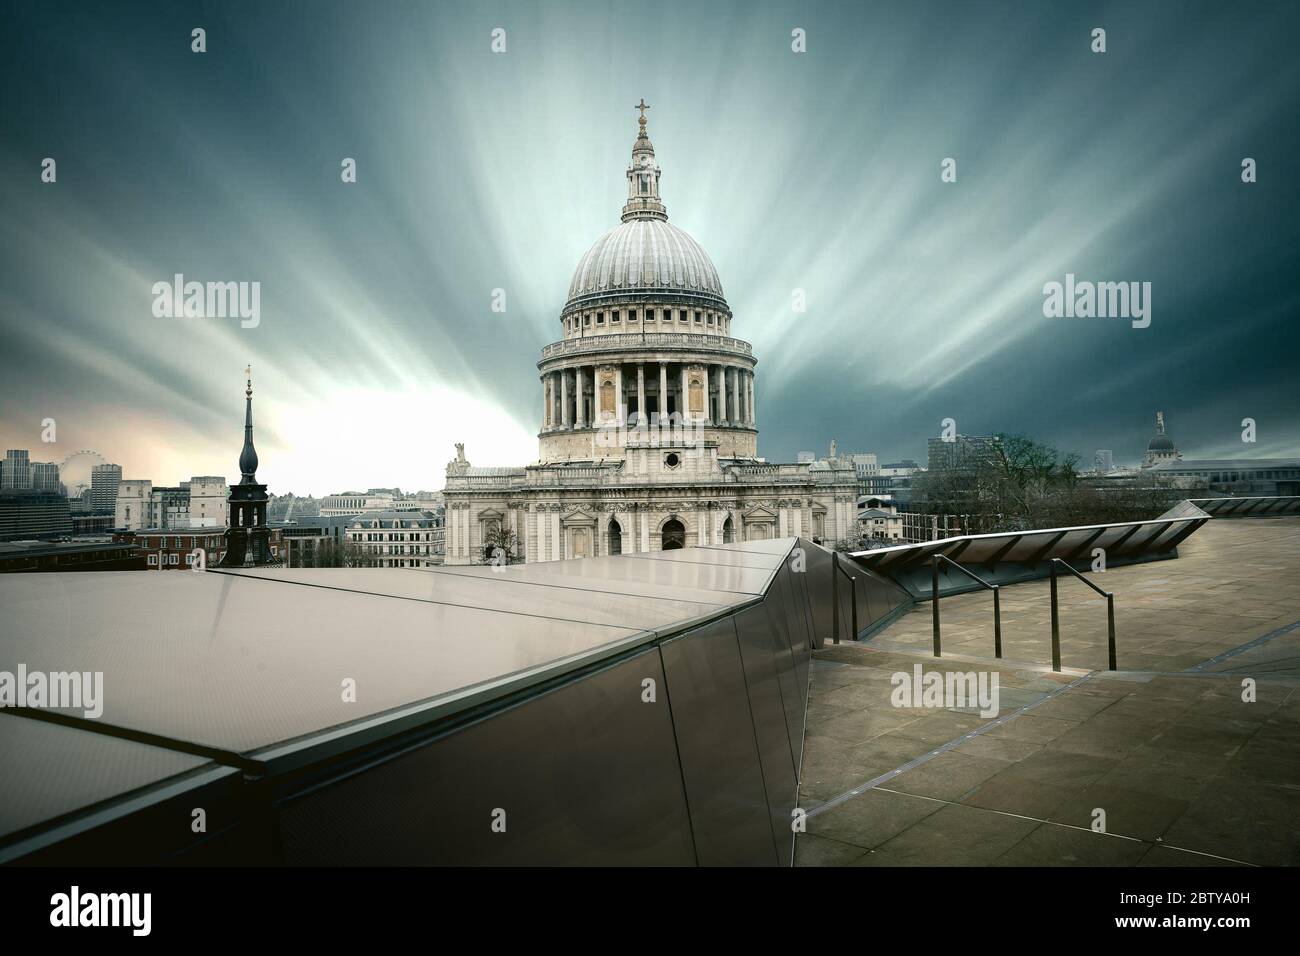 St. Pauls Cathedral shot from One New Change roof Terrace, with long exposure capturing cloud movement over London skyline, London, England, United Ki Stock Photo